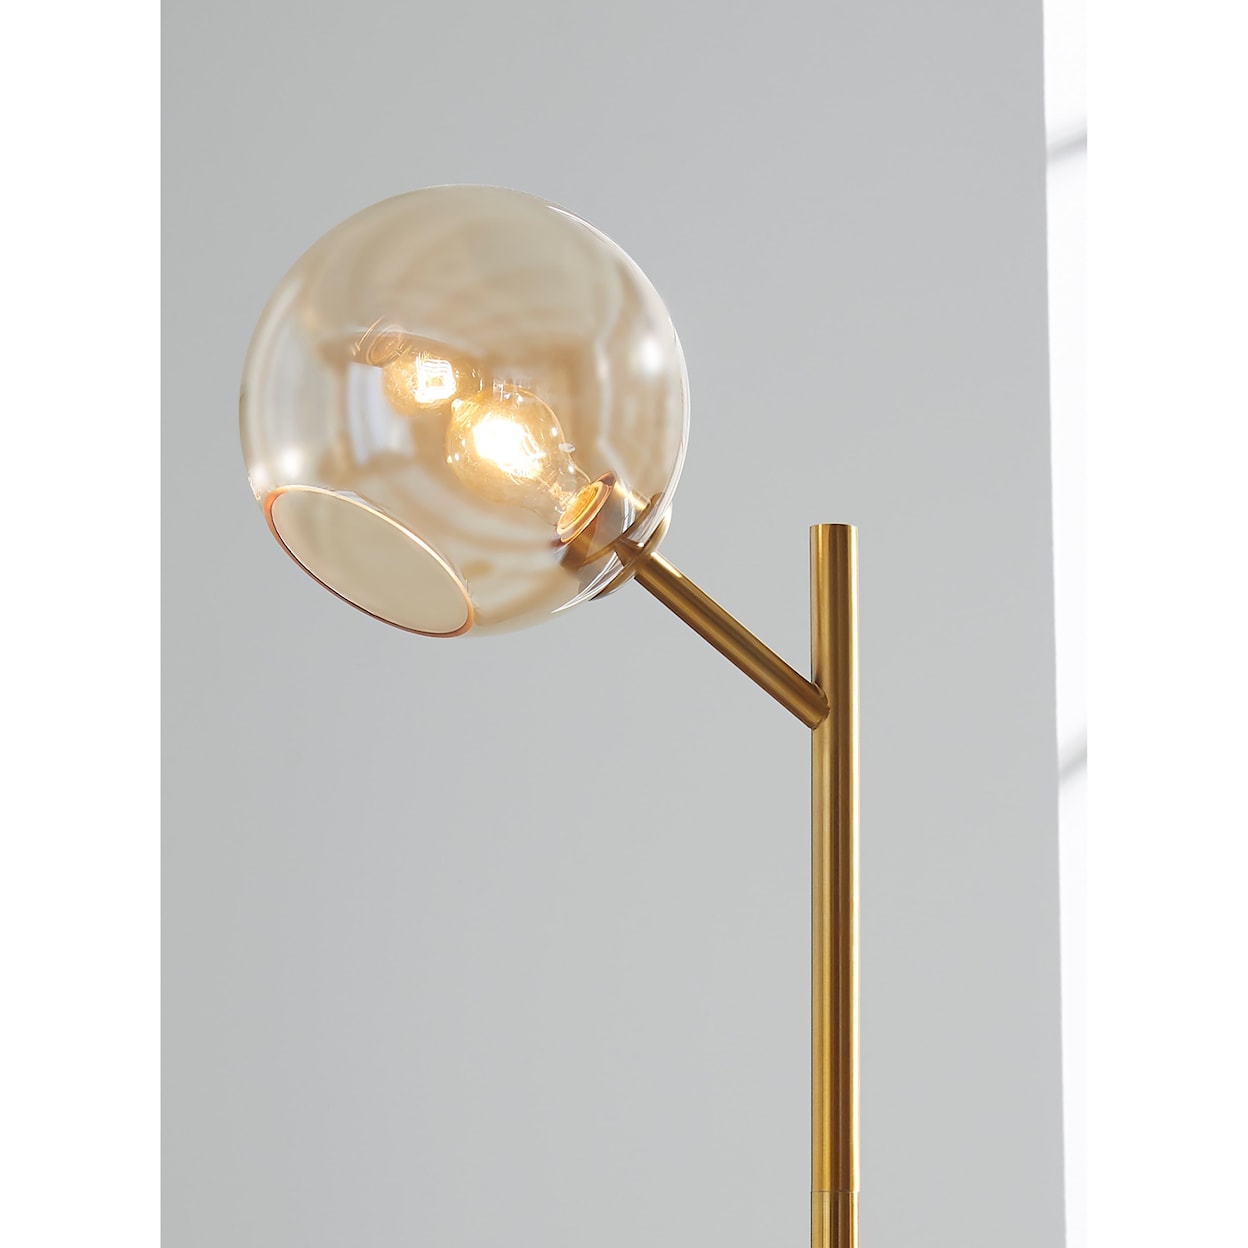 Signature Design by Ashley Lamps - Contemporary Abanson Gold Finish Metal Floor Lamp